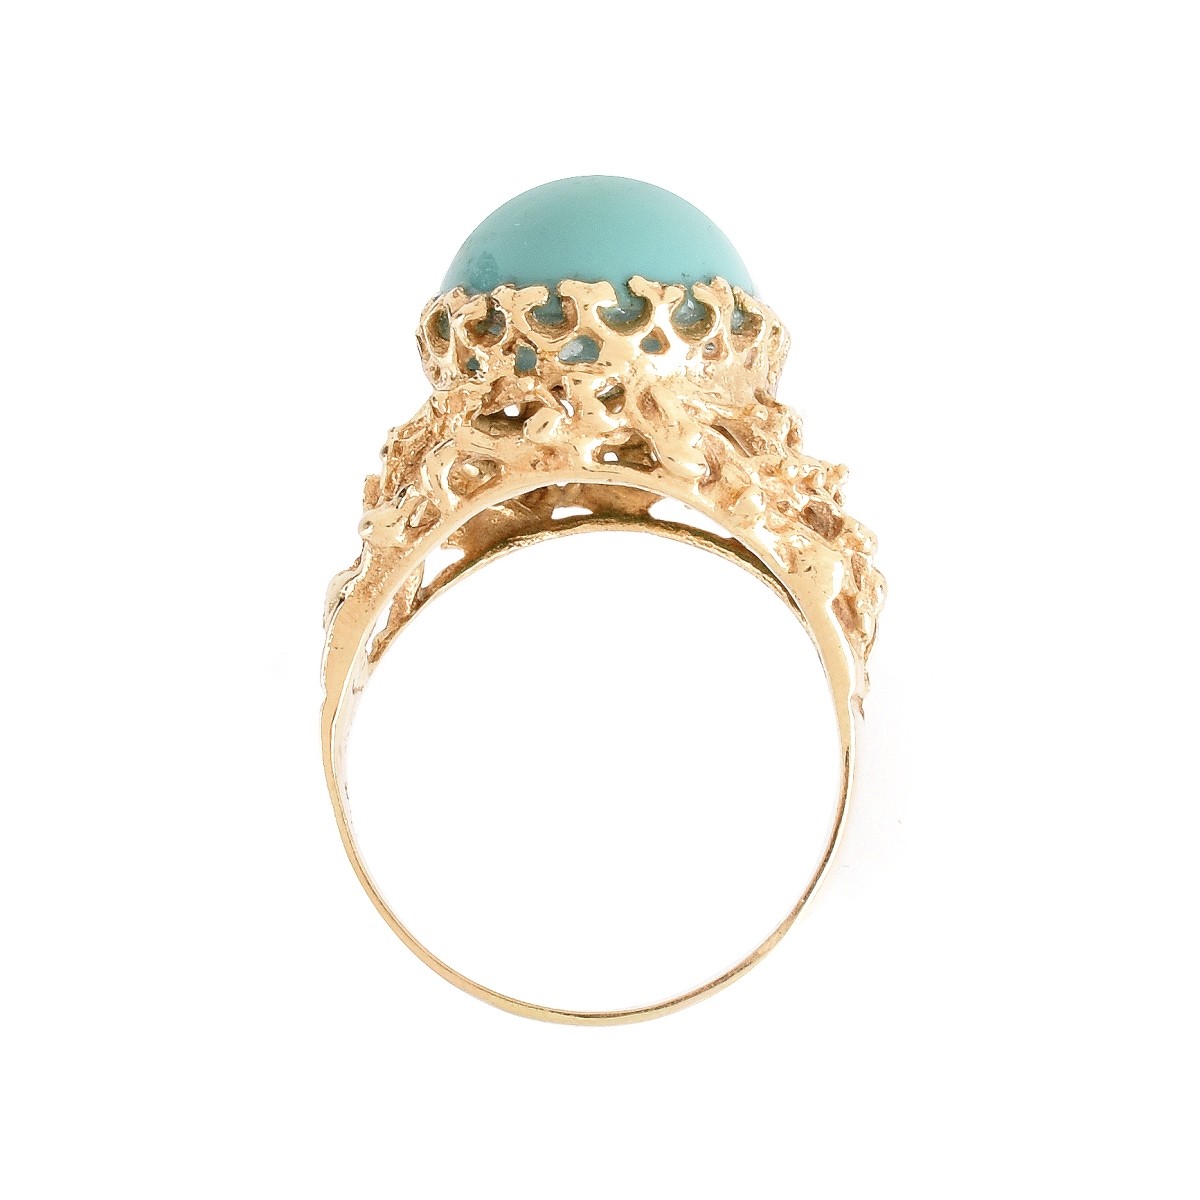 Vintage Persian Turquoise and 14K Ring